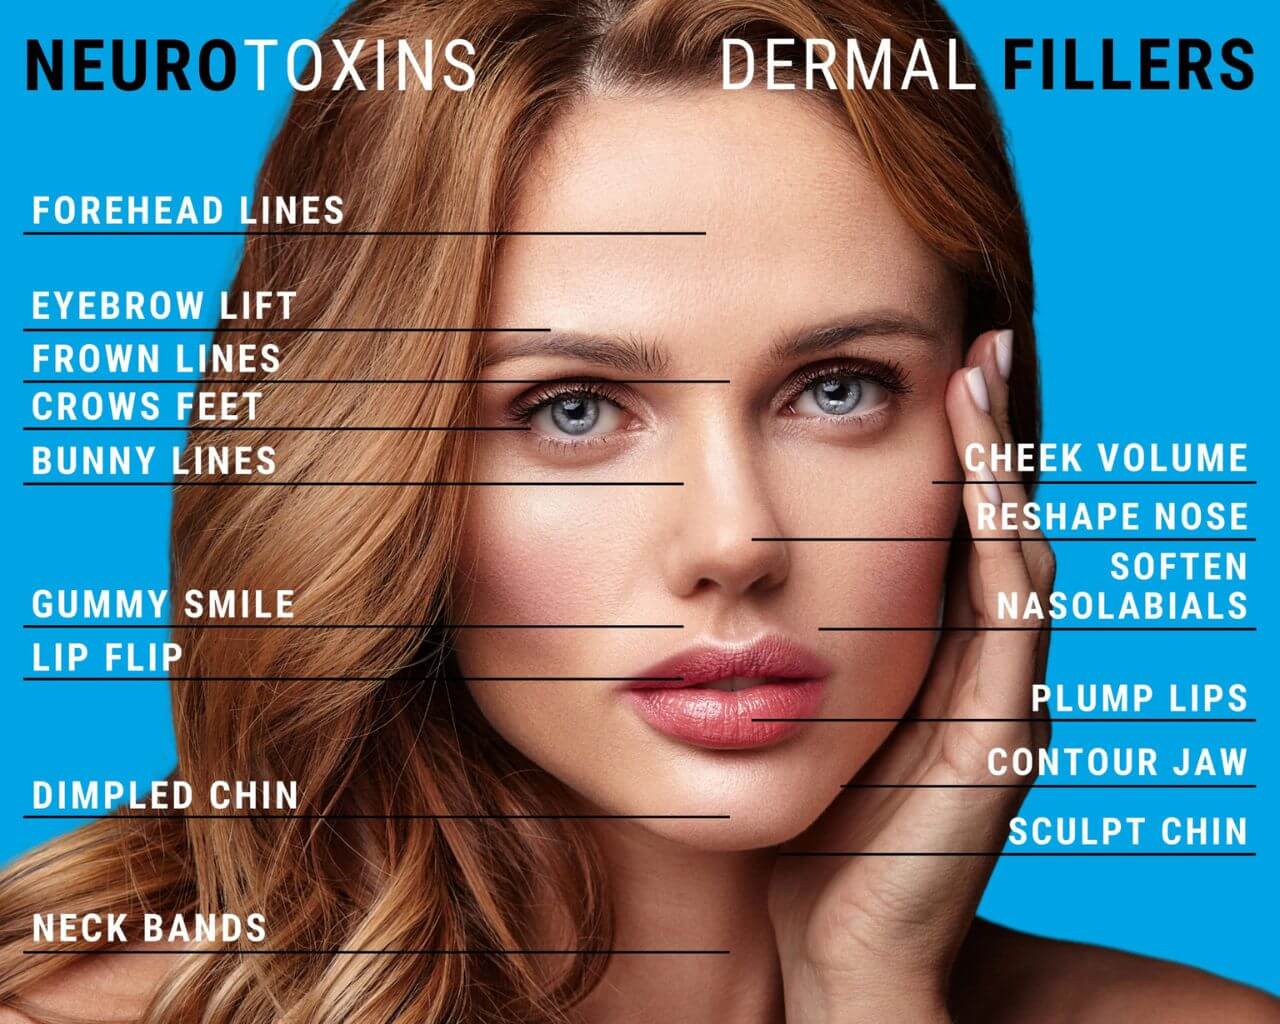 Beautiful woman with perfect face promoting Dermal filler and Neurotoxin treatment areas in Strongsville, OH